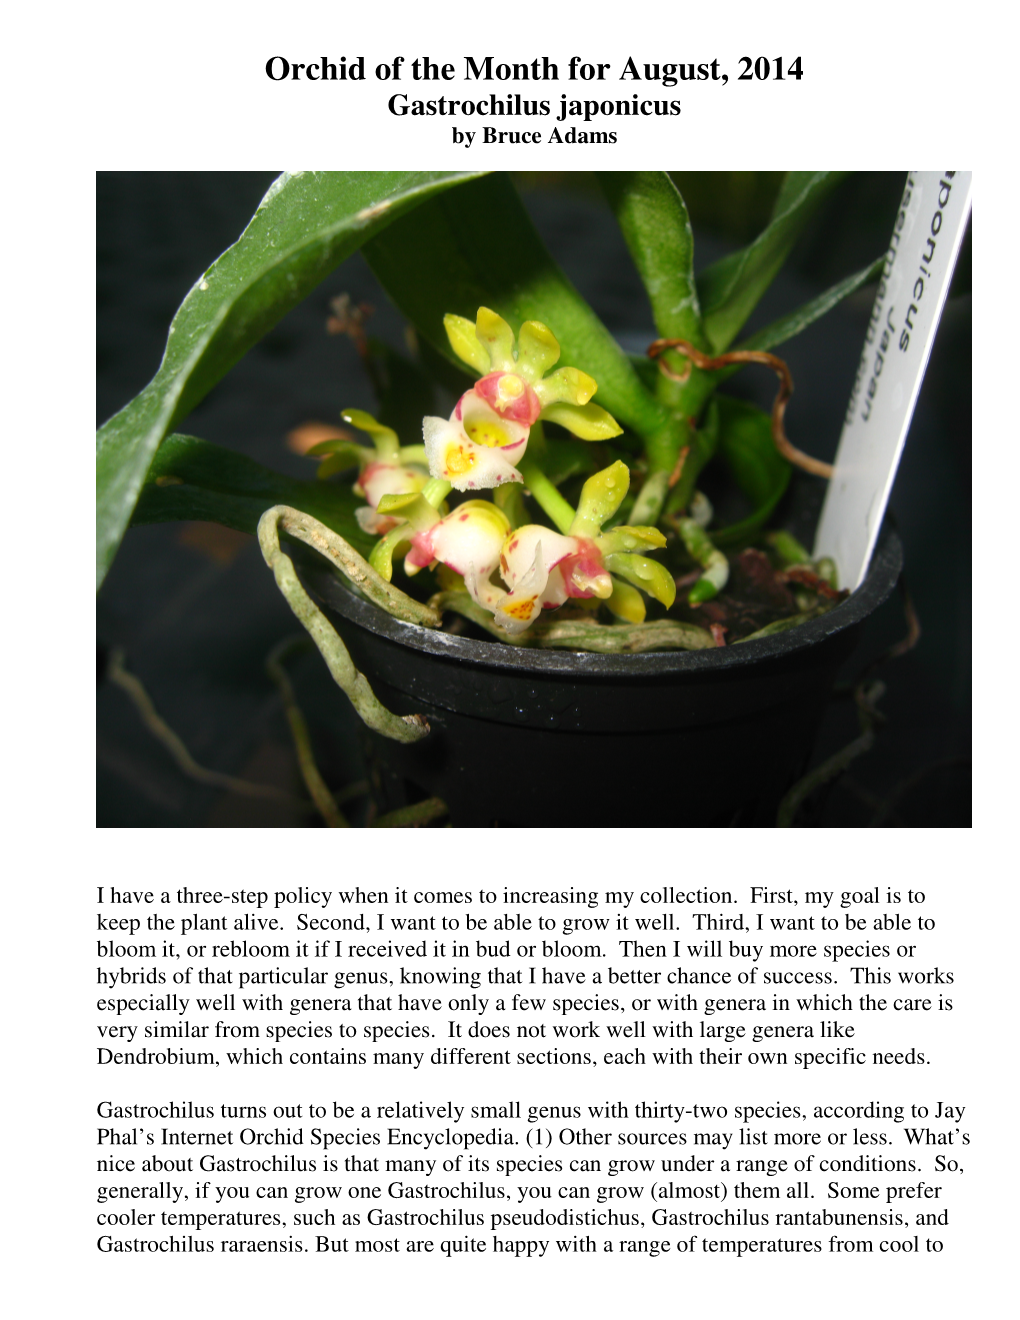 Orchid of the Month for August, 2014 Gastrochilus Japonicus by Bruce Adams